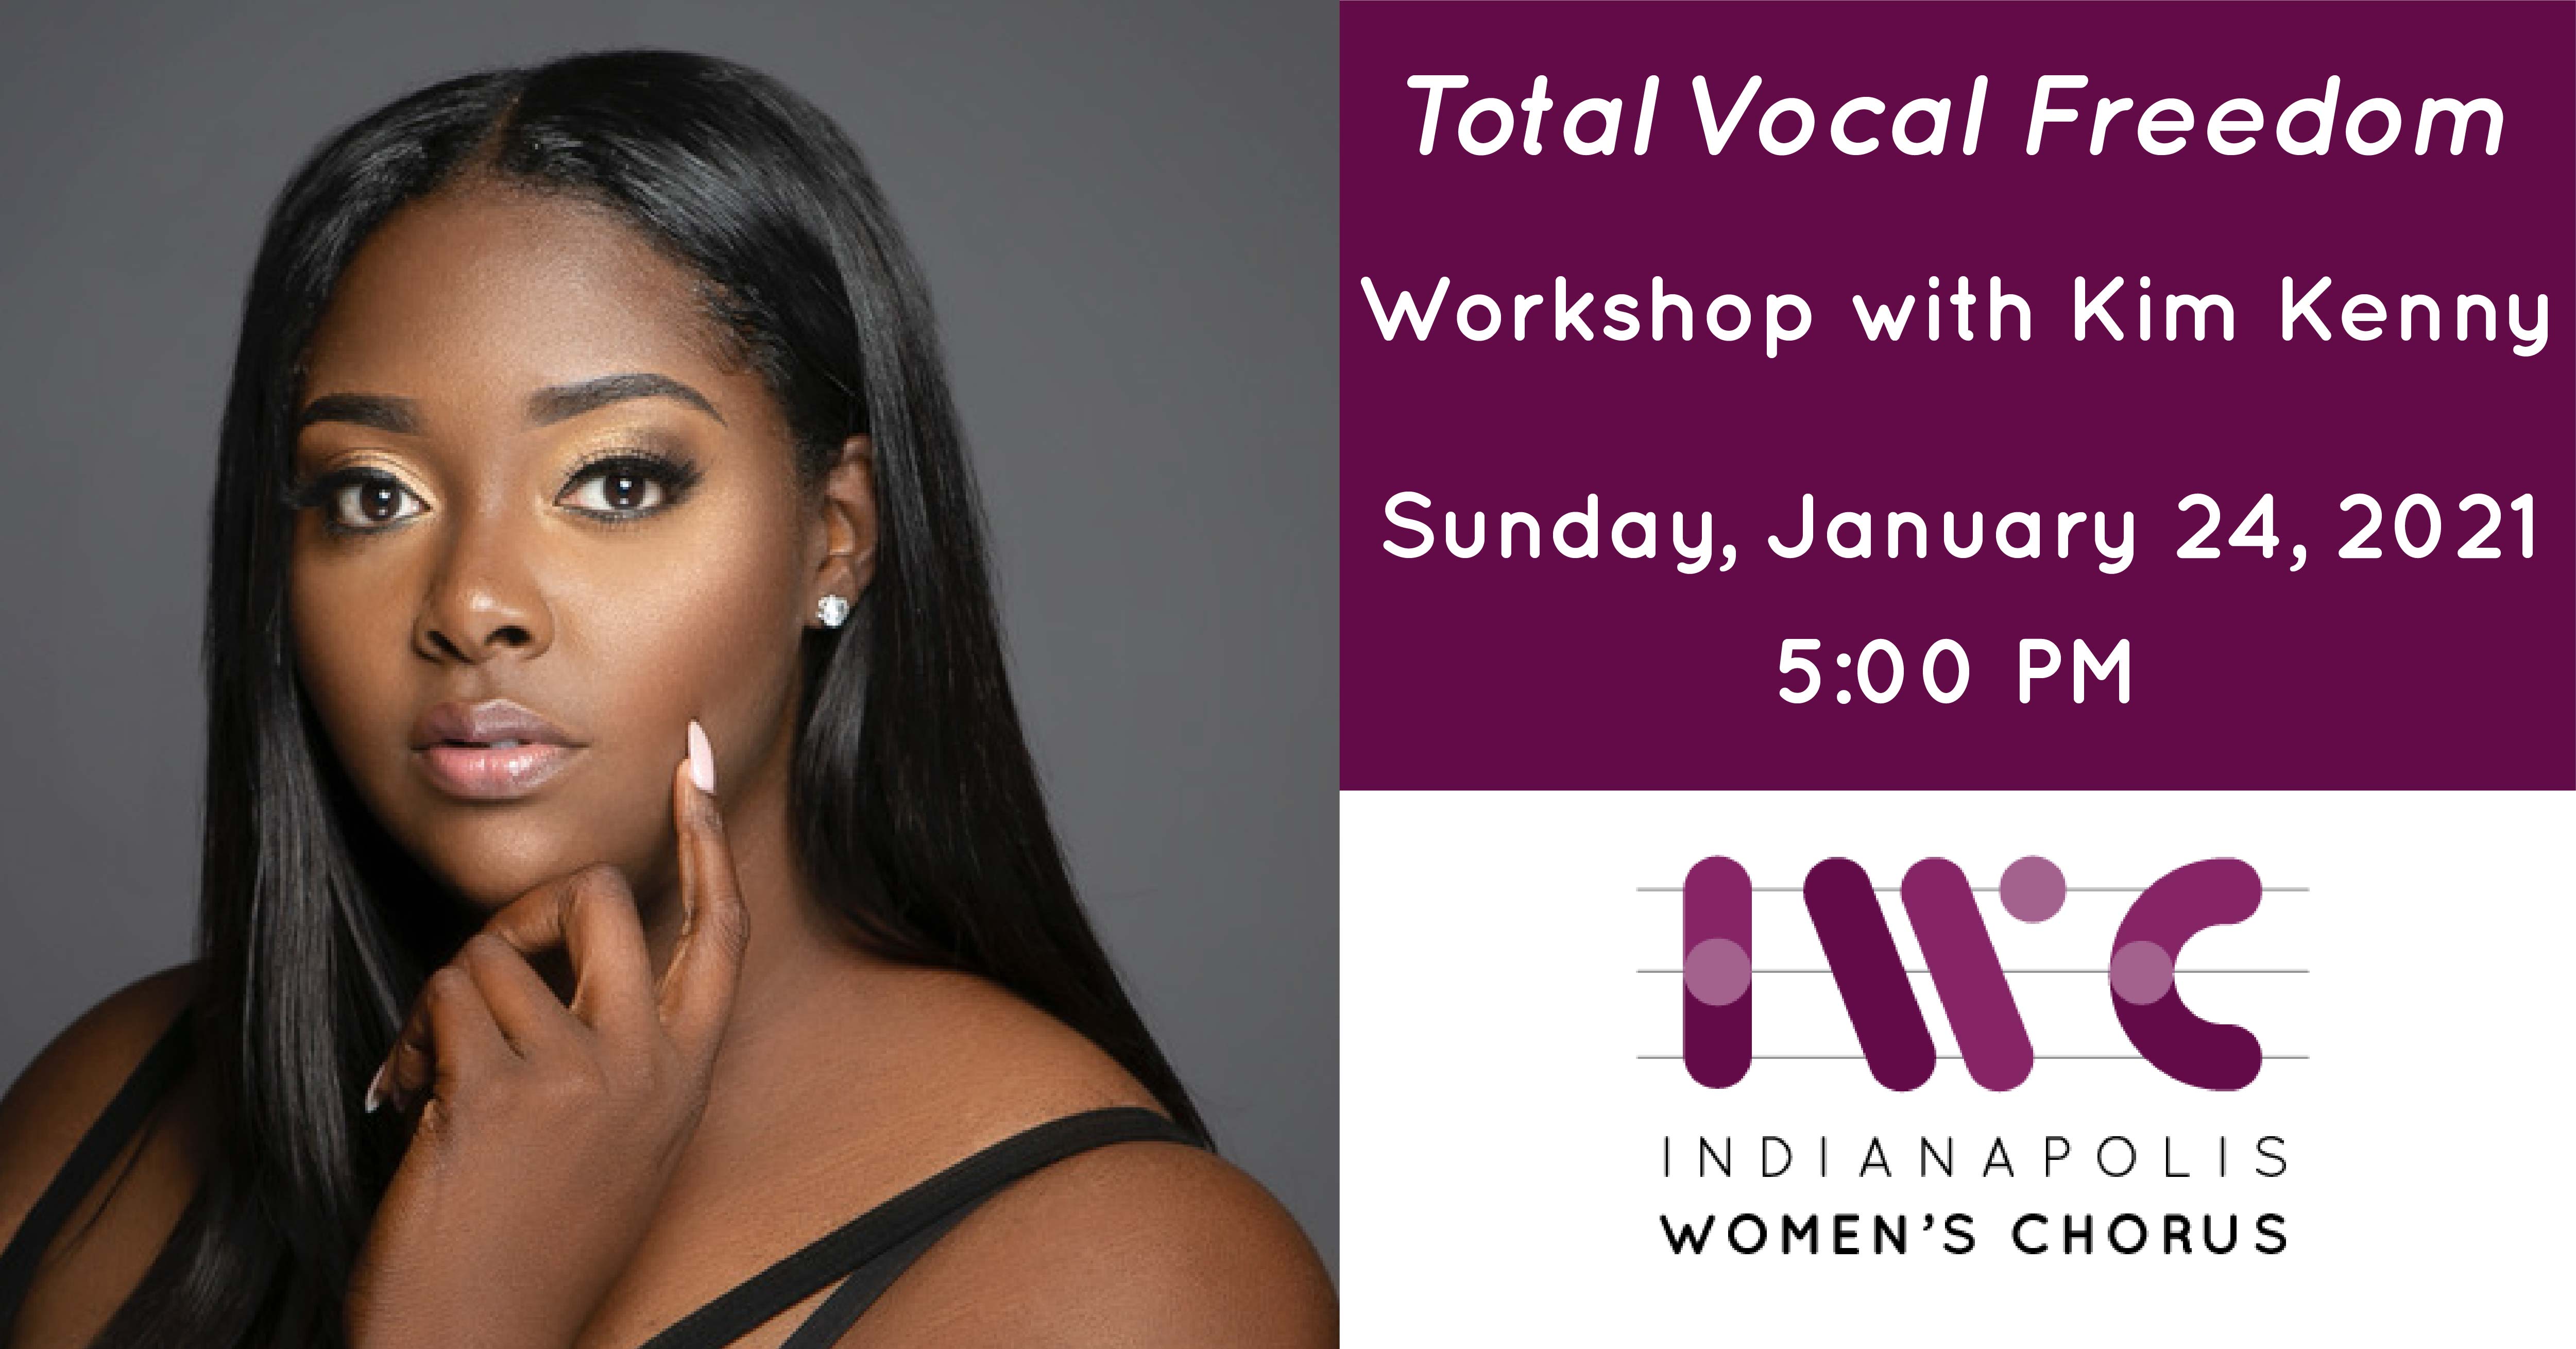 Workshop with Kim Kenny: Total Vocal Freedom